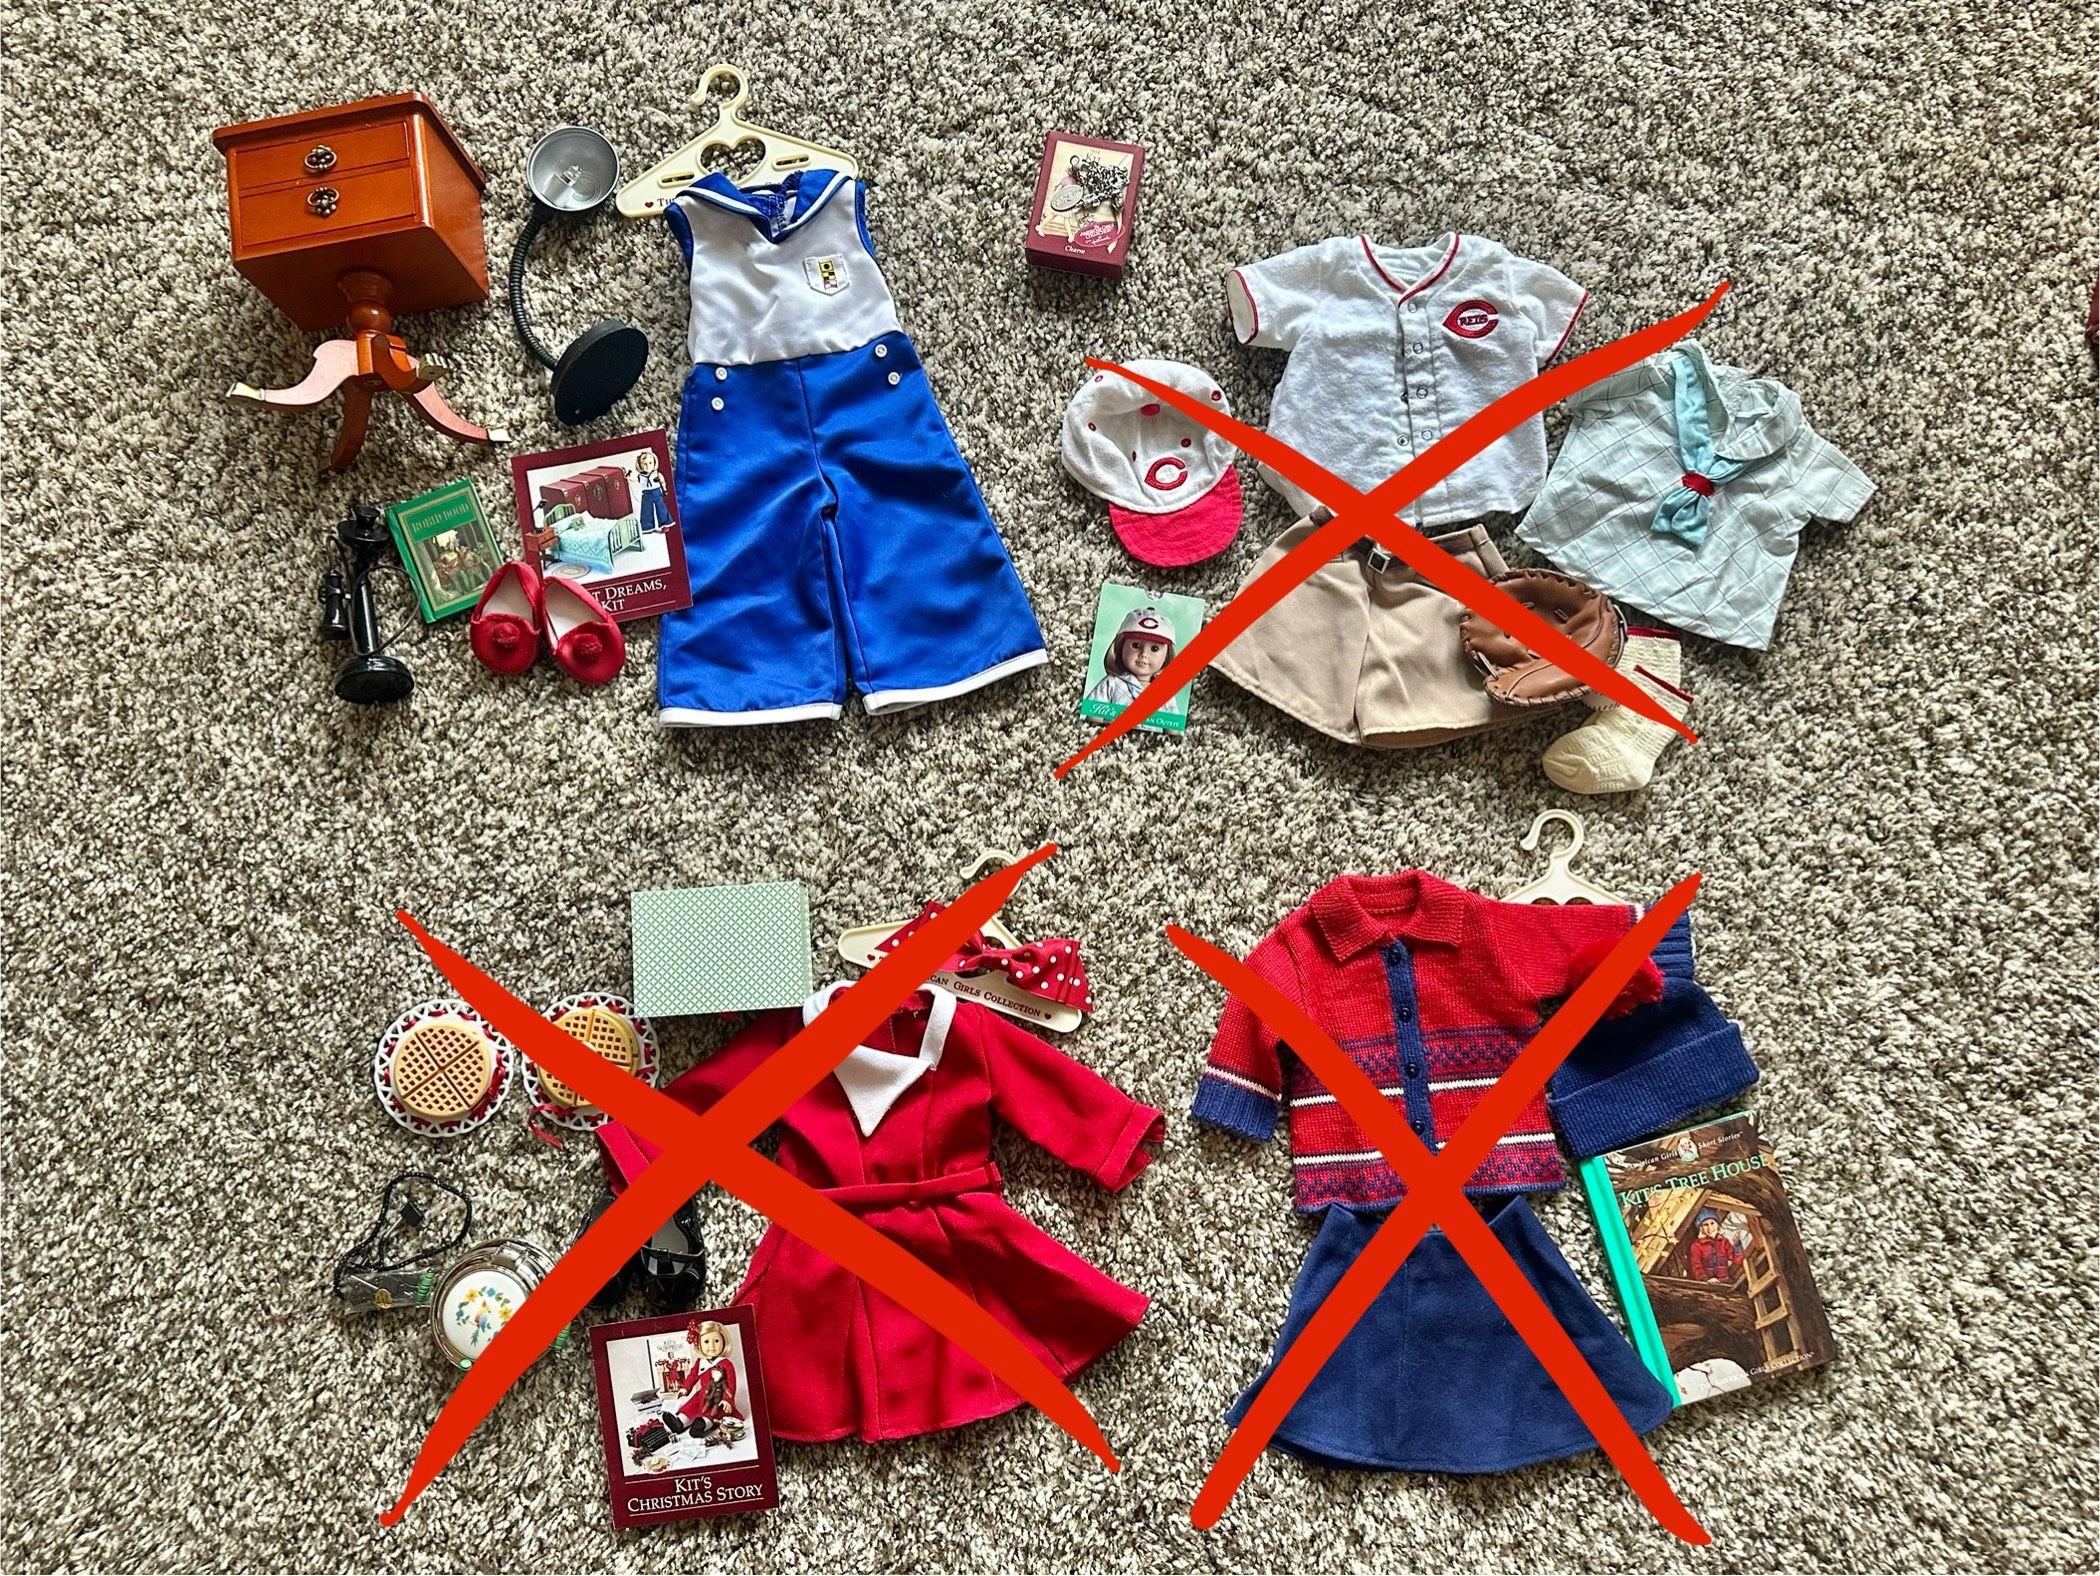 American girl kit retired outfits and accessories (pricing in description)